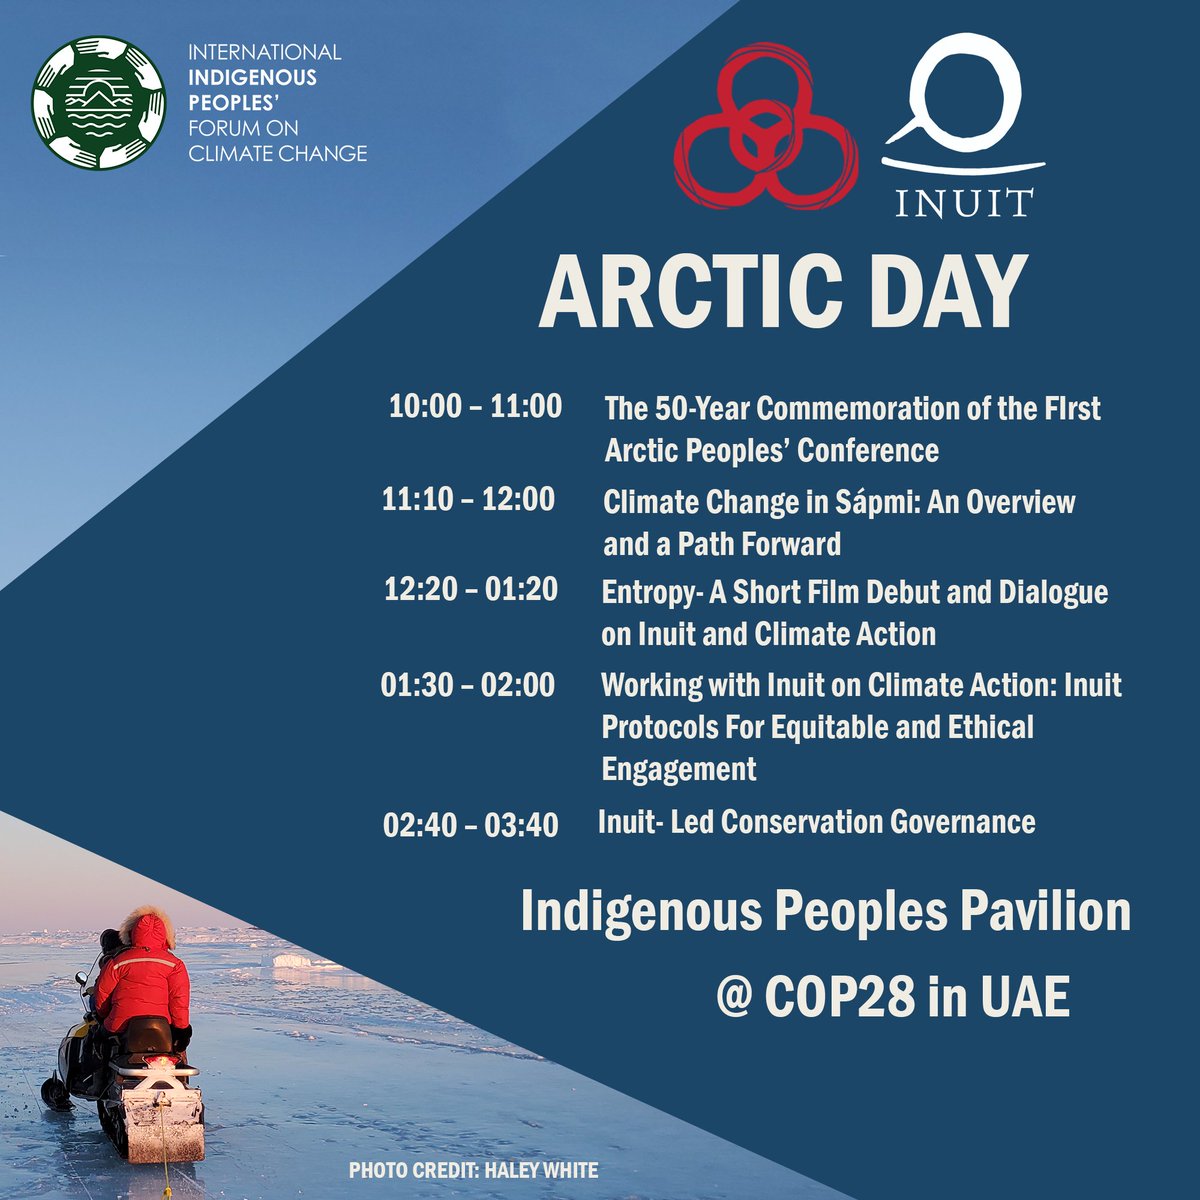 Tomorrow is Arctic Day at the Indigenous Peoples Pavilion at COP28 in UAE! See the schedule of presentations below. All events will be streamed live at iipfccpavilion.org. #Inuit #COP28 #IndigenousCOP28